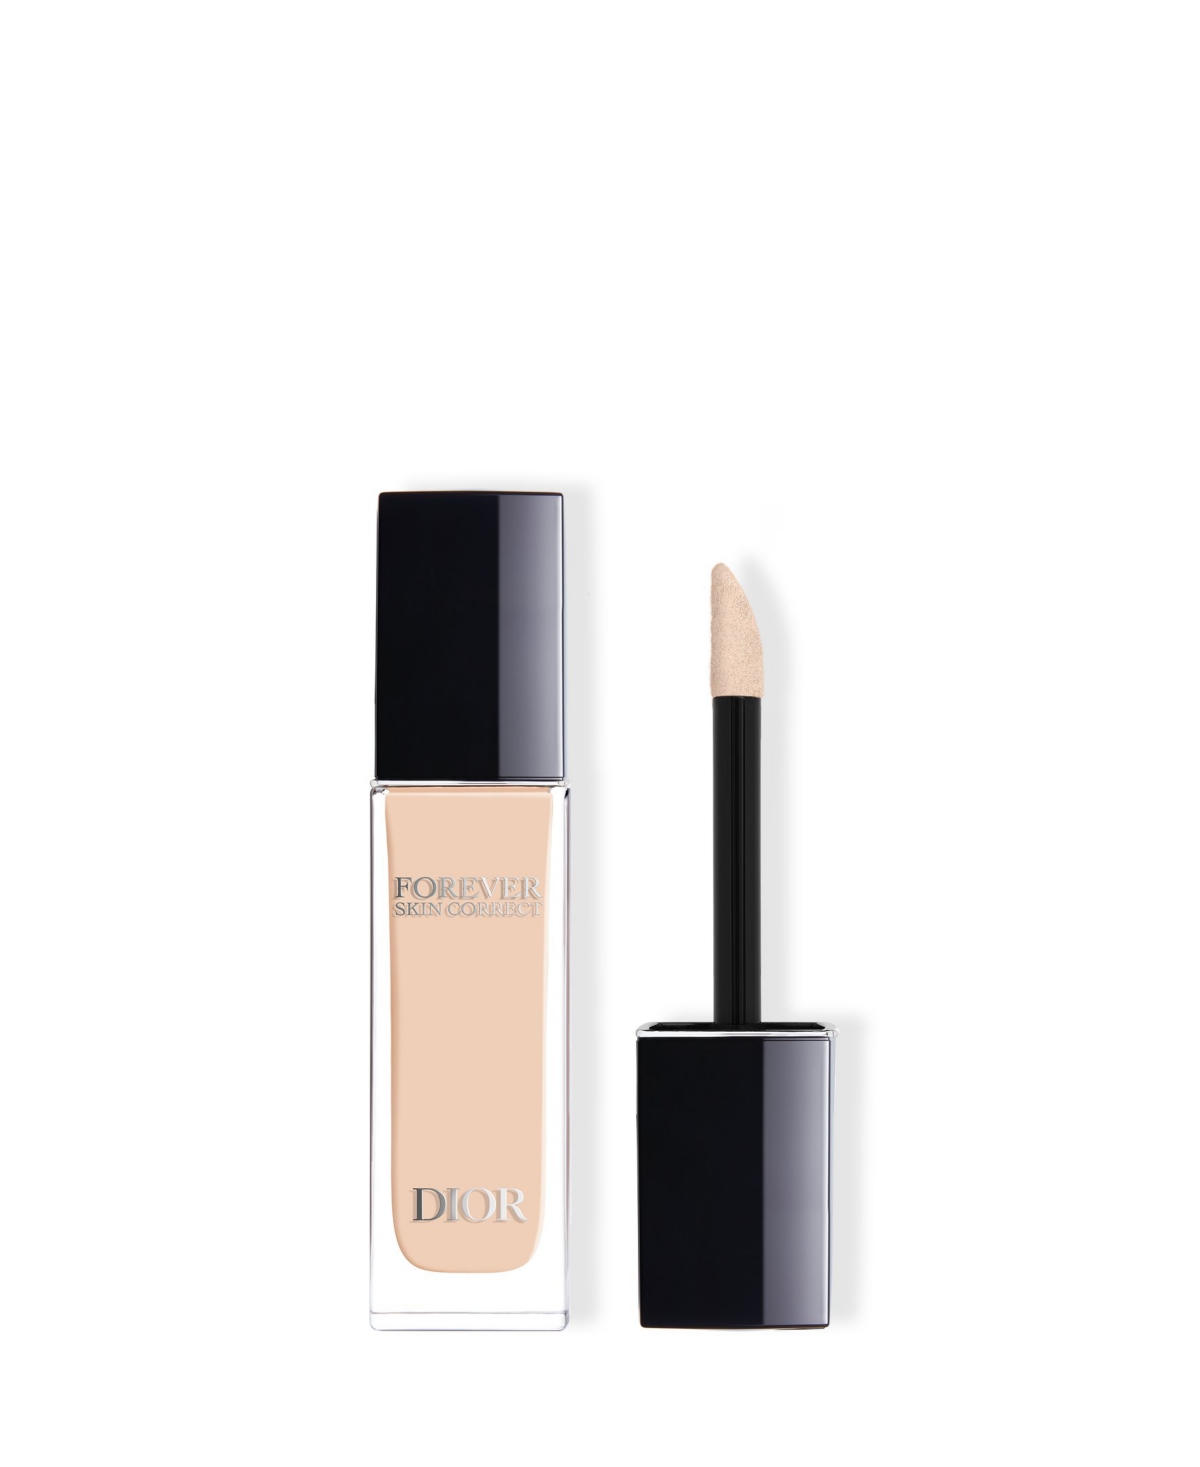 Dior Forever Skin Correct Full-coverage Concealer In Cr Cool Rosy (very Light Skin With Pink